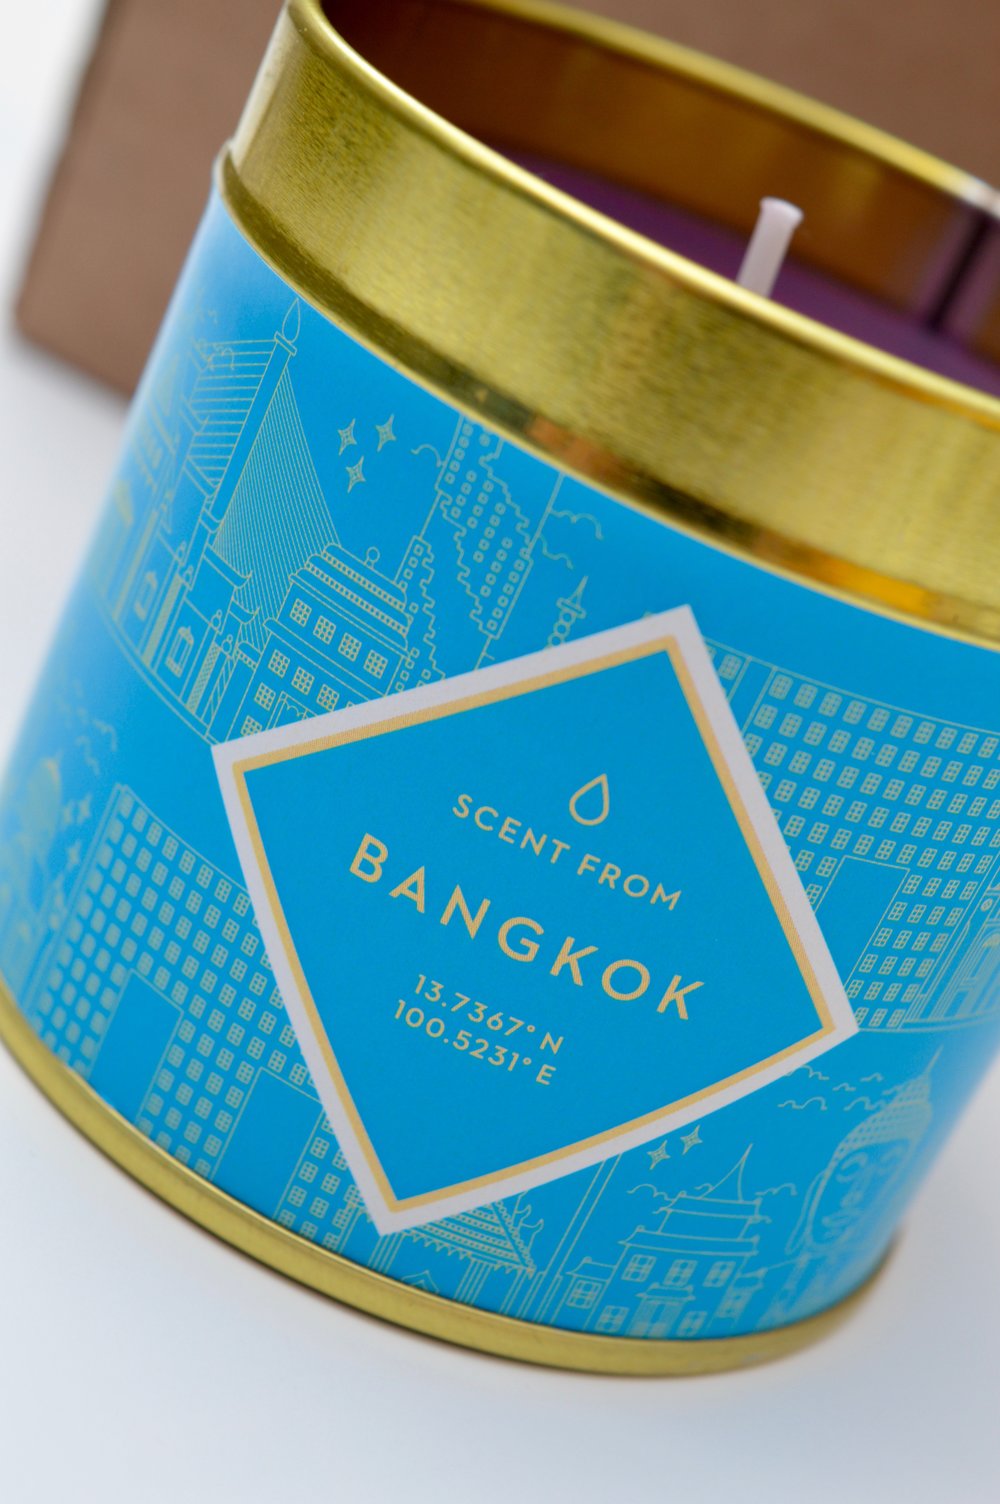 Scent From Candle Subscription Bangkok | Home Interiors | Elle Blonde Luxury Lifestyle Destination Blog